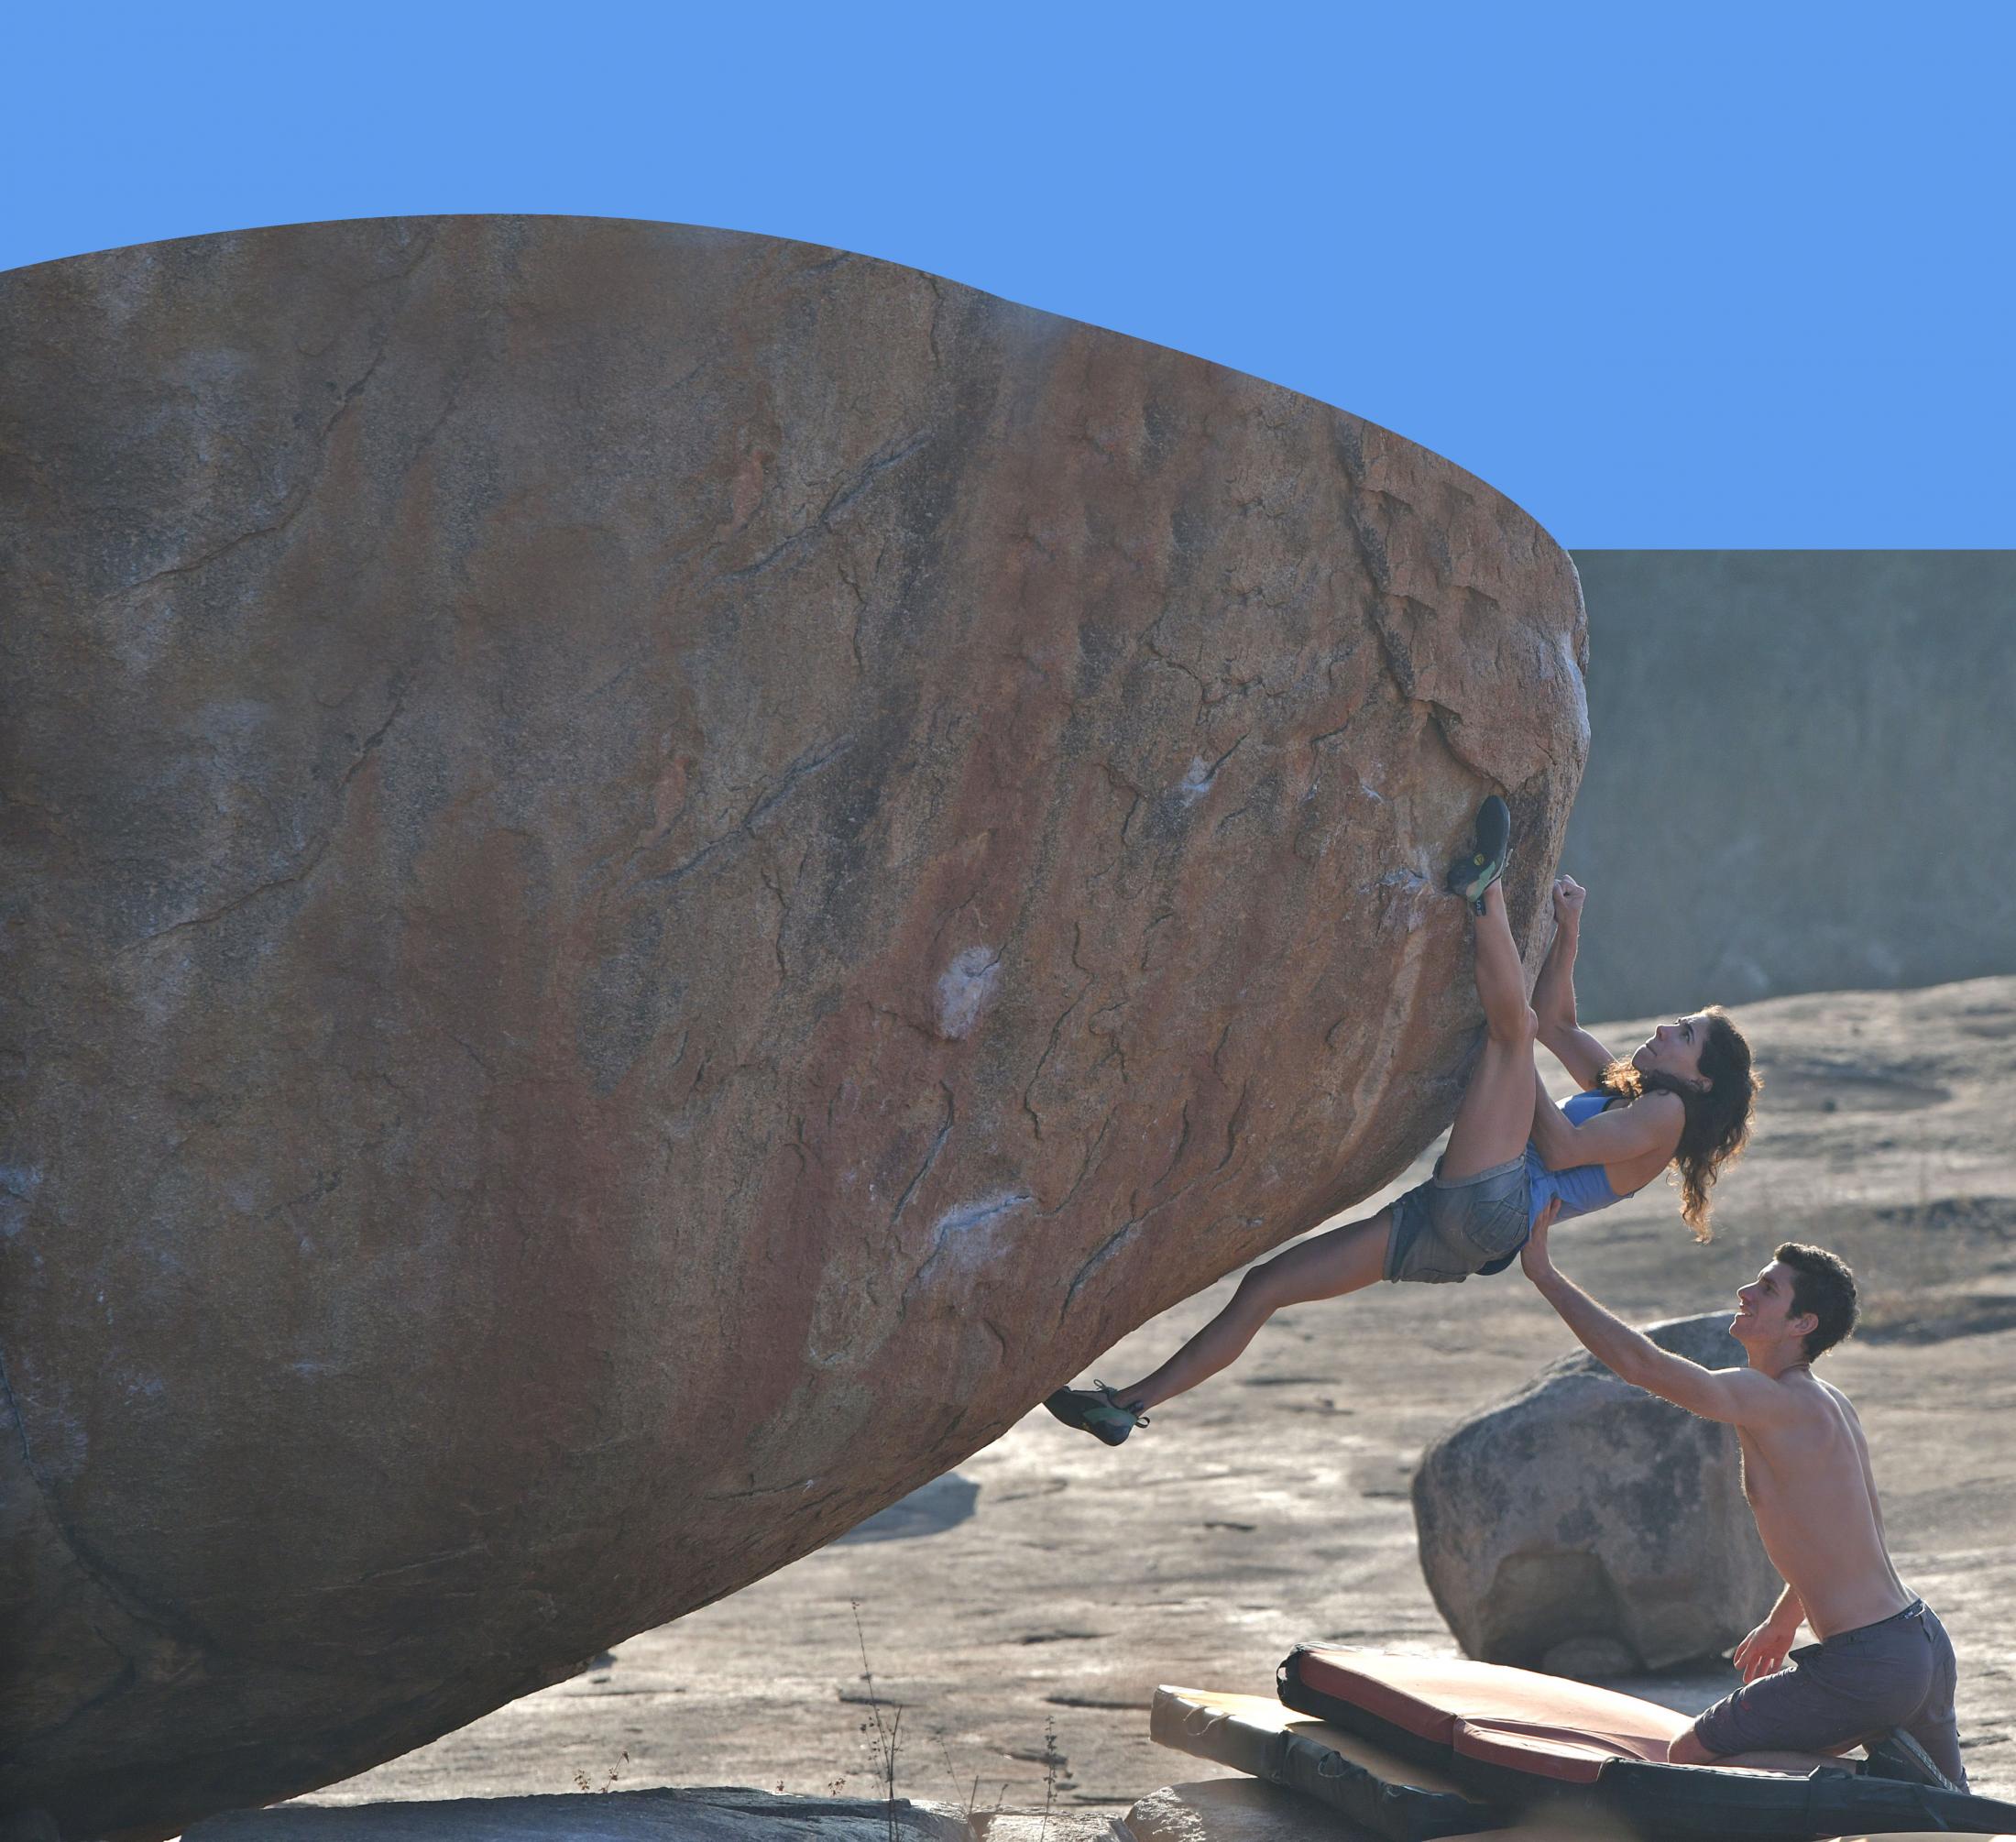 Life on the rocks - You see boulders everywhere. And suddenly you spot...